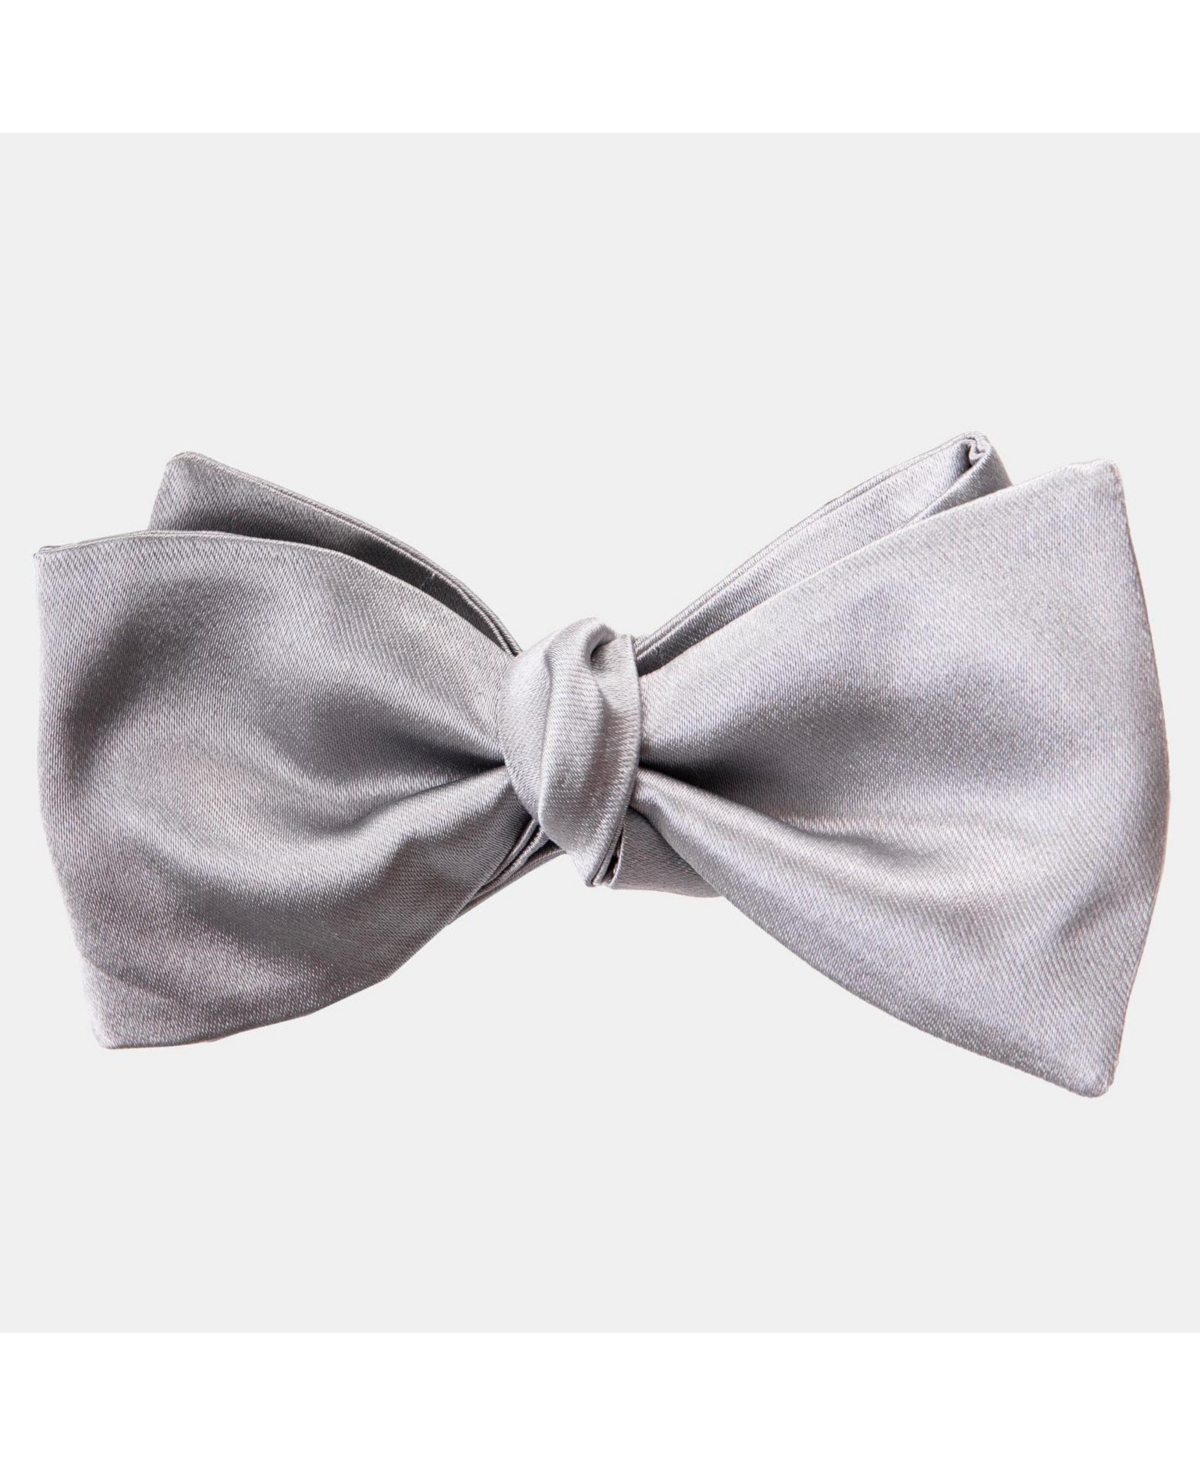 Negroni - Silk Bow Tie for Men - Pewter